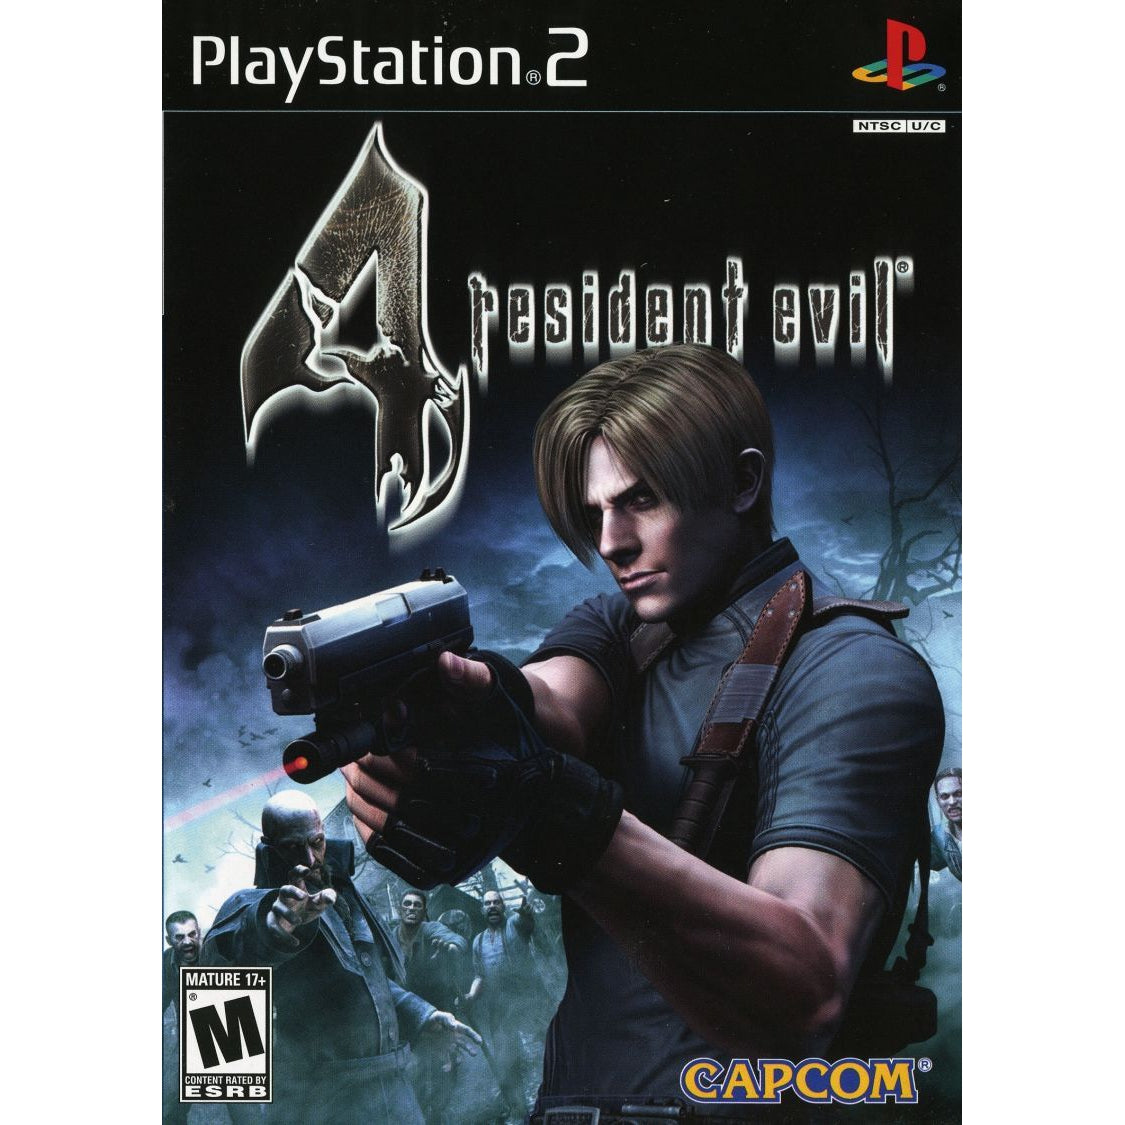 Resident Evil 4 - PlayStation 2 (PS2) Game Complete - YourGamingShop.com - Buy, Sell, Trade Video Games Online. 120 Day Warranty. Satisfaction Guaranteed.